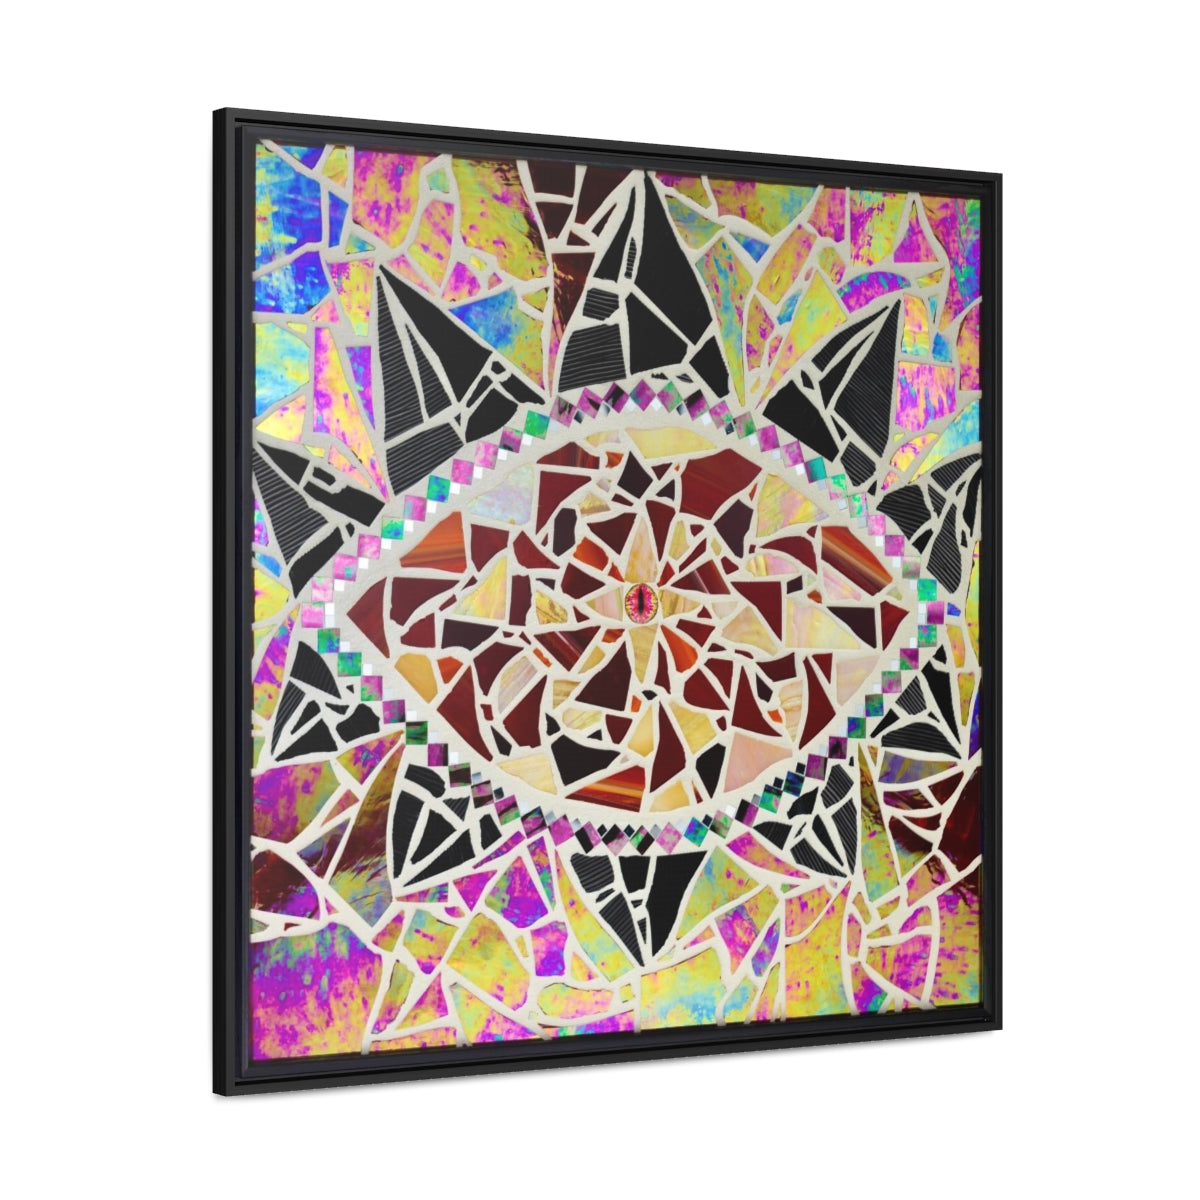 Red Dragon Mosaic Eye Fine Art Square Framed Gallery Wrapped Canvas Print